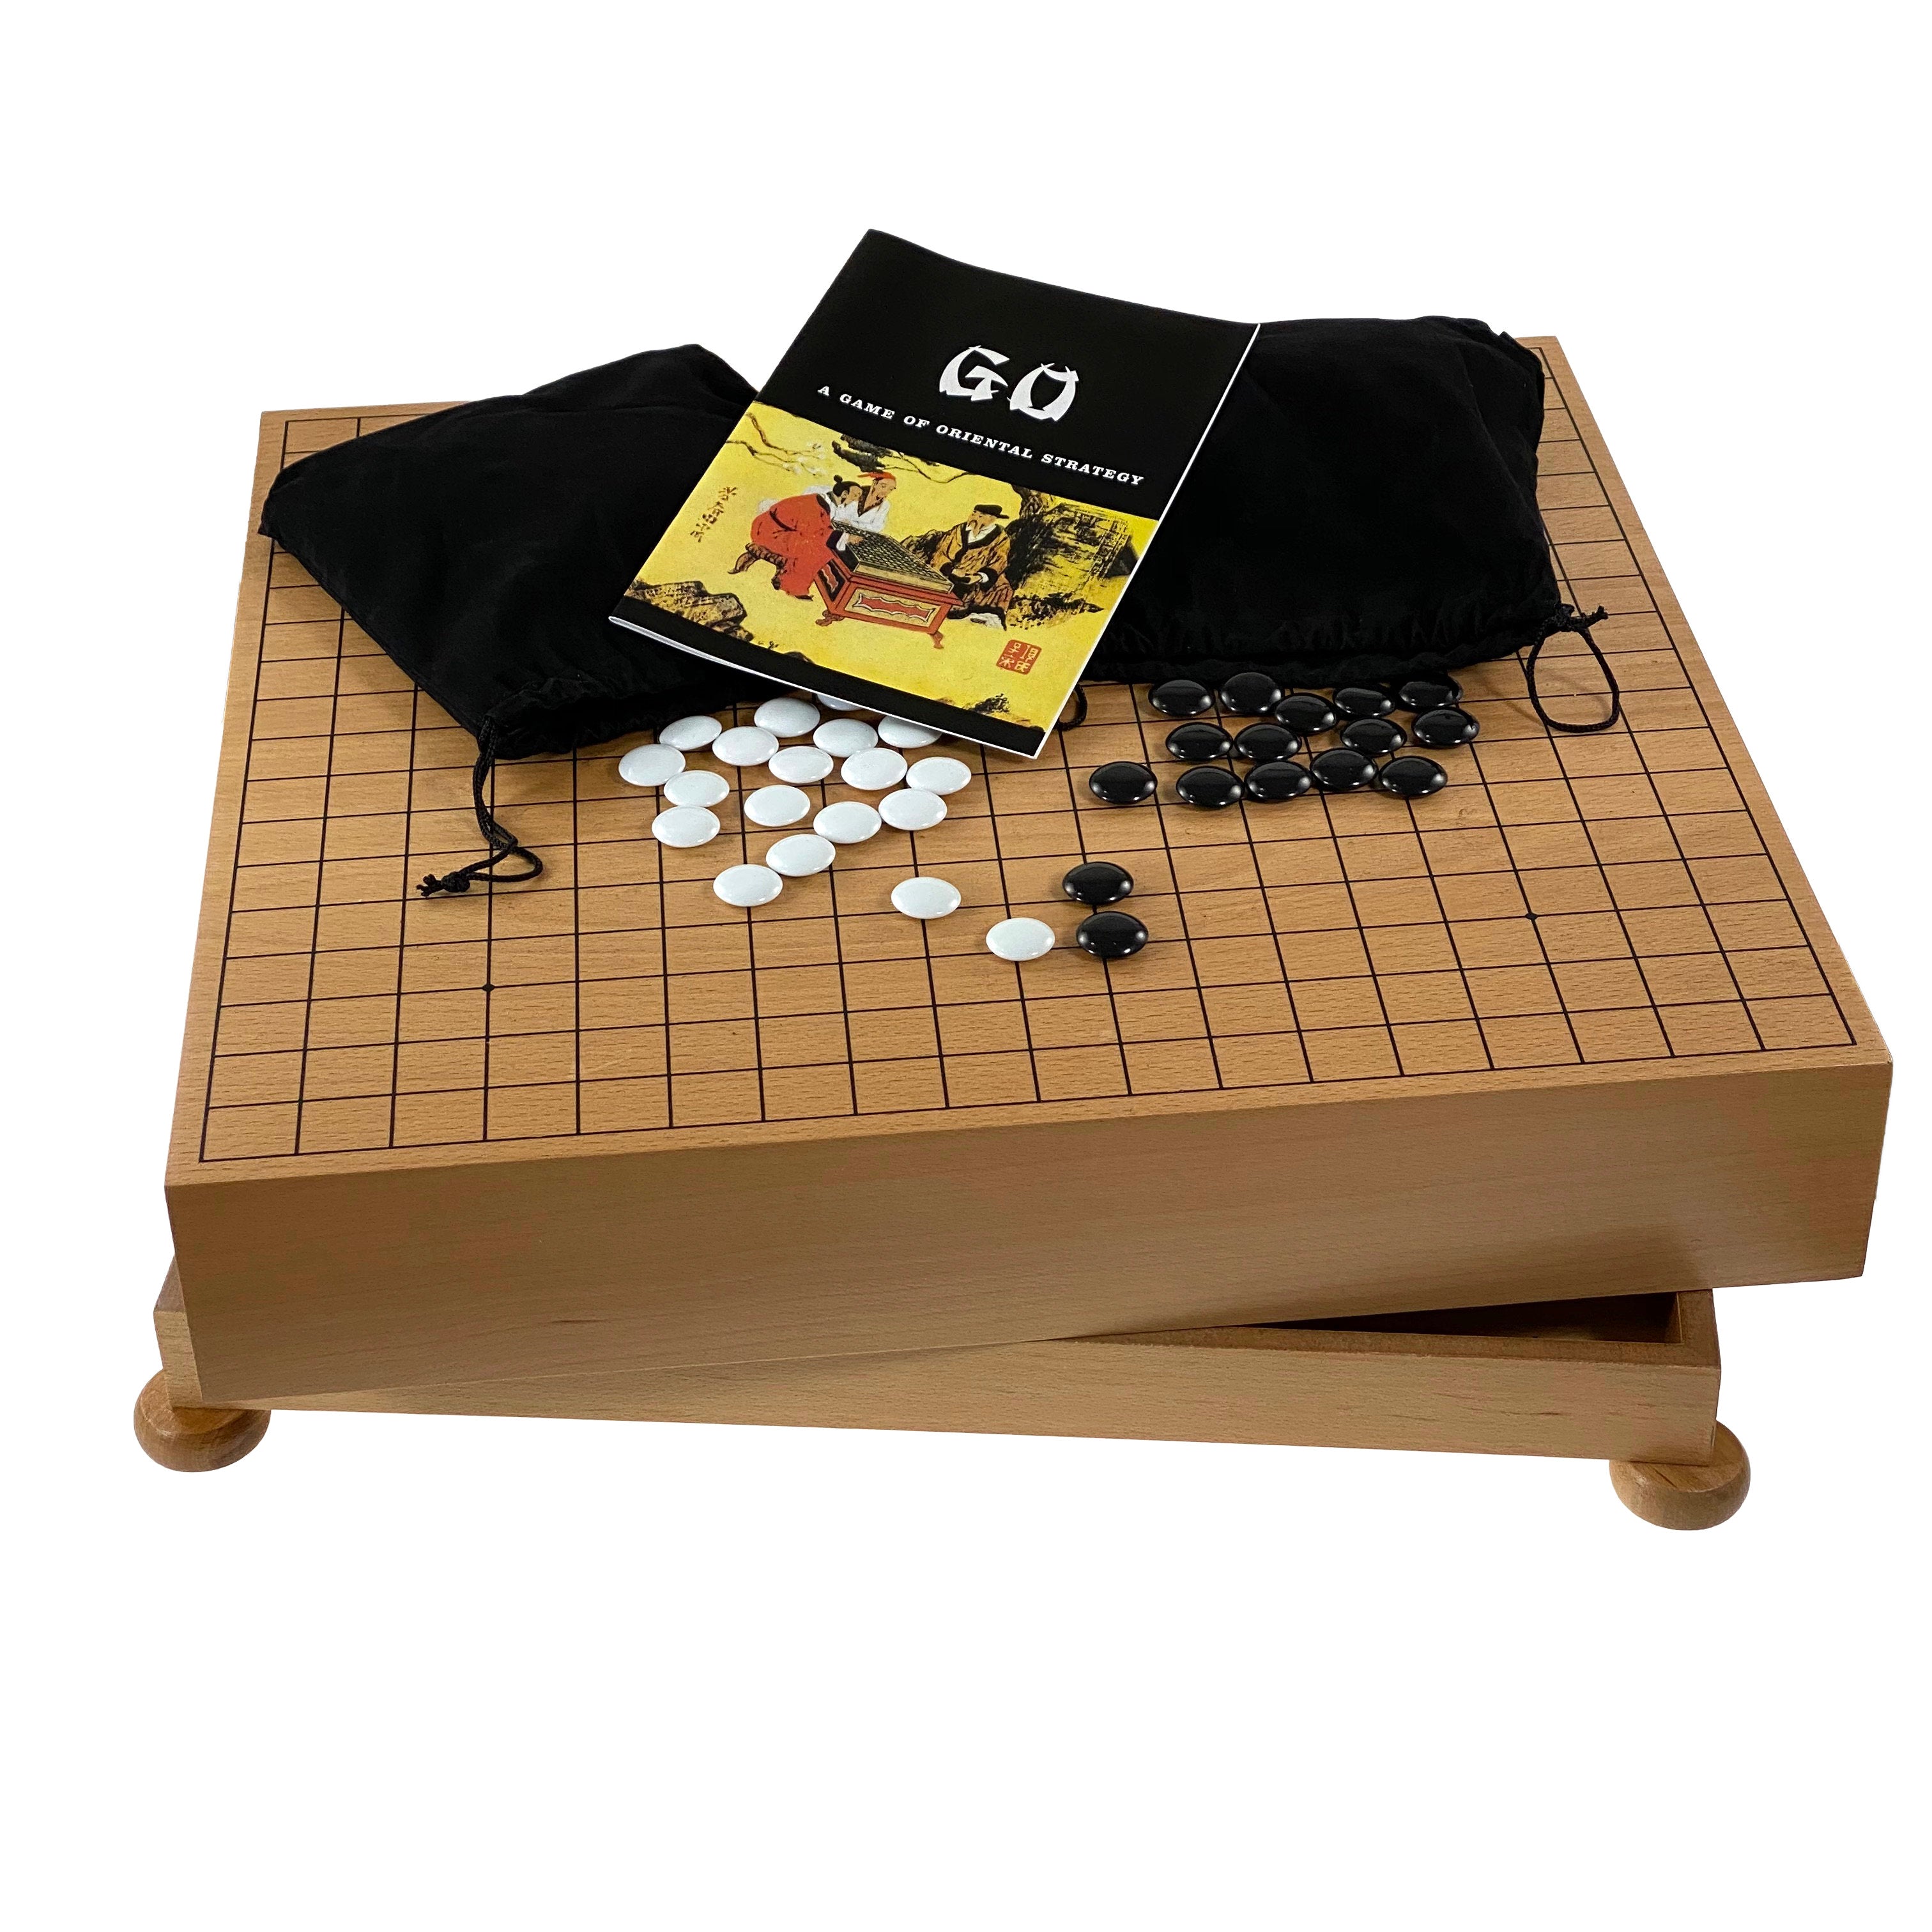 Deluxe Complete Wooden Go Game And Storage Chest    